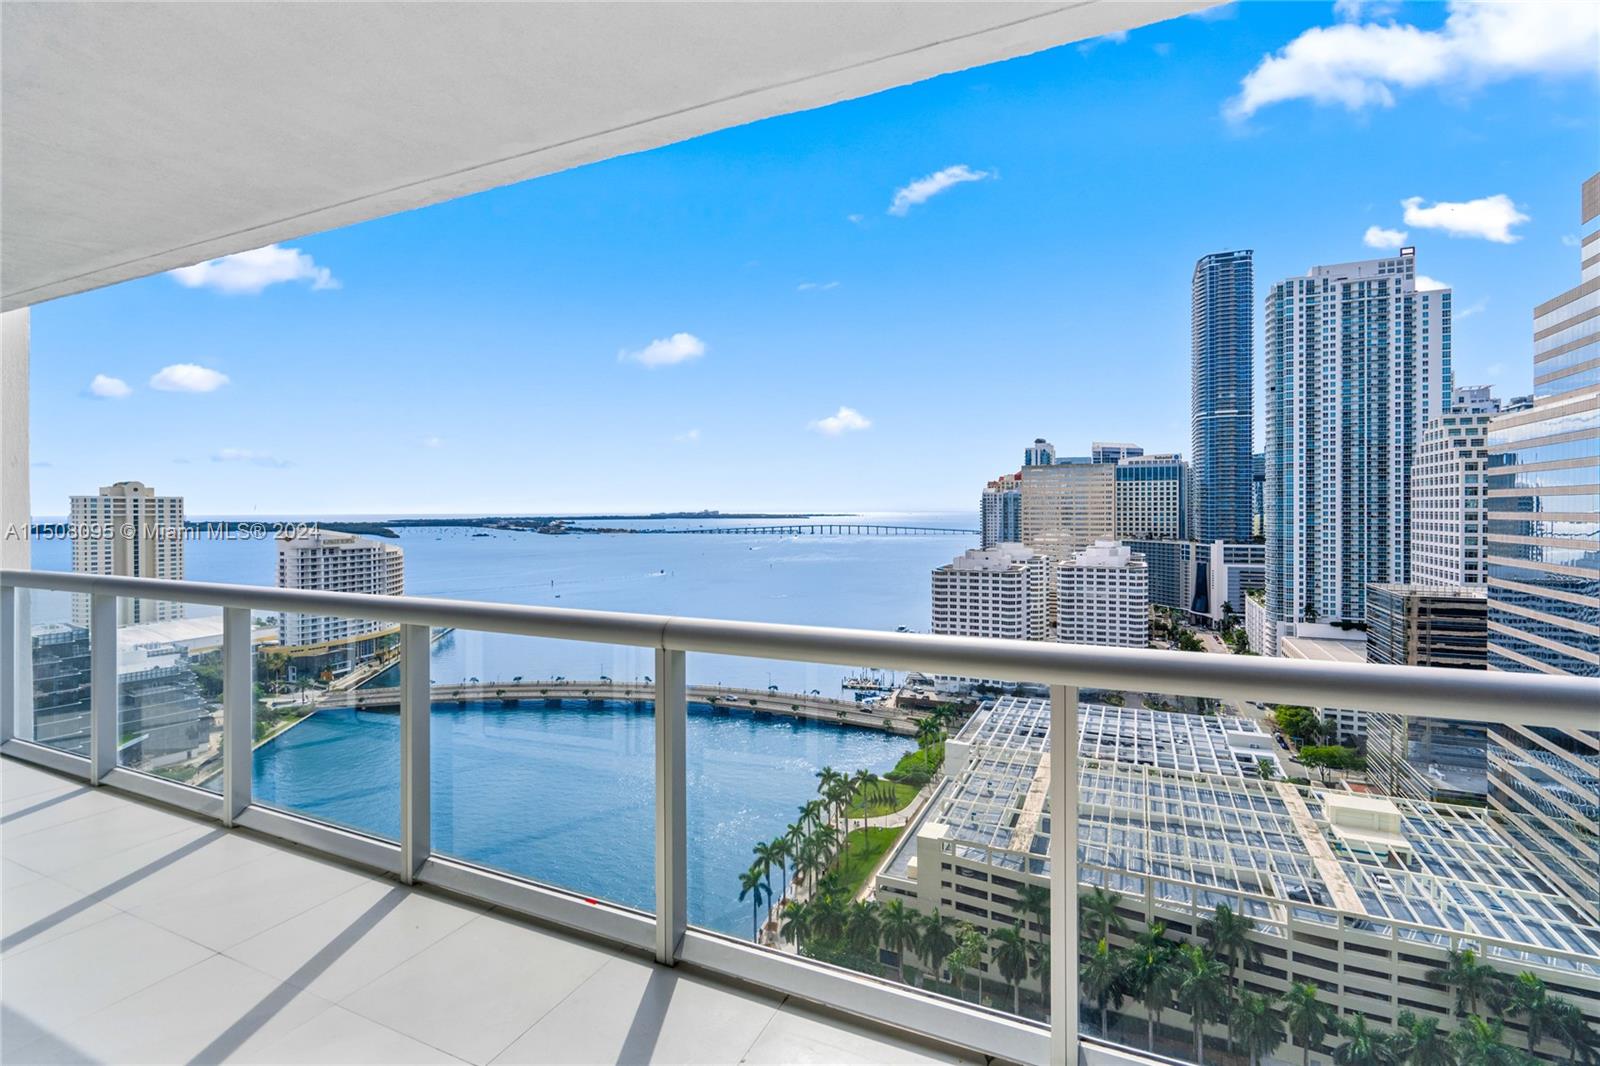 Experience the Brickell lifestyle in this charming 2-bed, 2-bath, 1-Den luxury condo. Features 1,518 Sq Ft living area, 1,738 Sq Ft total as per developer floor plan, include modern luxury finishes, Master bedroom with 2 walk-in closets and waterfront views, master bathroom is designed to perfection with a separate bathtub, Guest bedroom also offers waterfront views. Unit has panoramic views of the waterfront bay and Brickell skyline! ICON BRICKELL is nearby to Brickell City Centre & shops/restaurants. Fantastic dining in Icon complex with world renown Cipriani restaurant and Cantina la Veinte. Building amenities highly popular with large spa, remodeled pool area, fitness center and much more.  No Airbnb. Pet friendly. Move-in Ready.